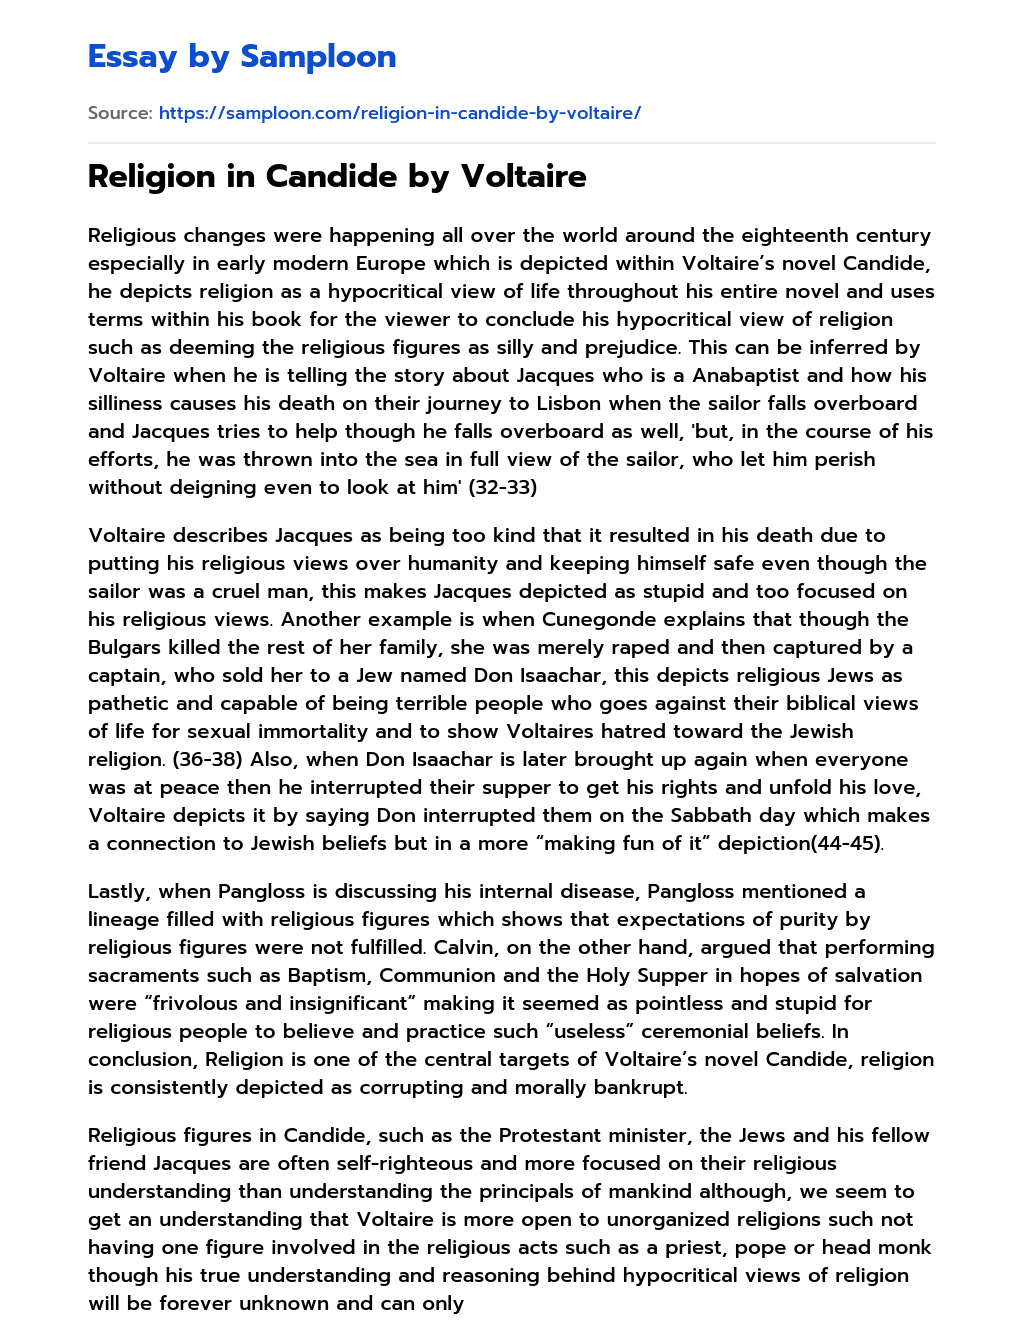 Religion in Candide by Voltaire essay